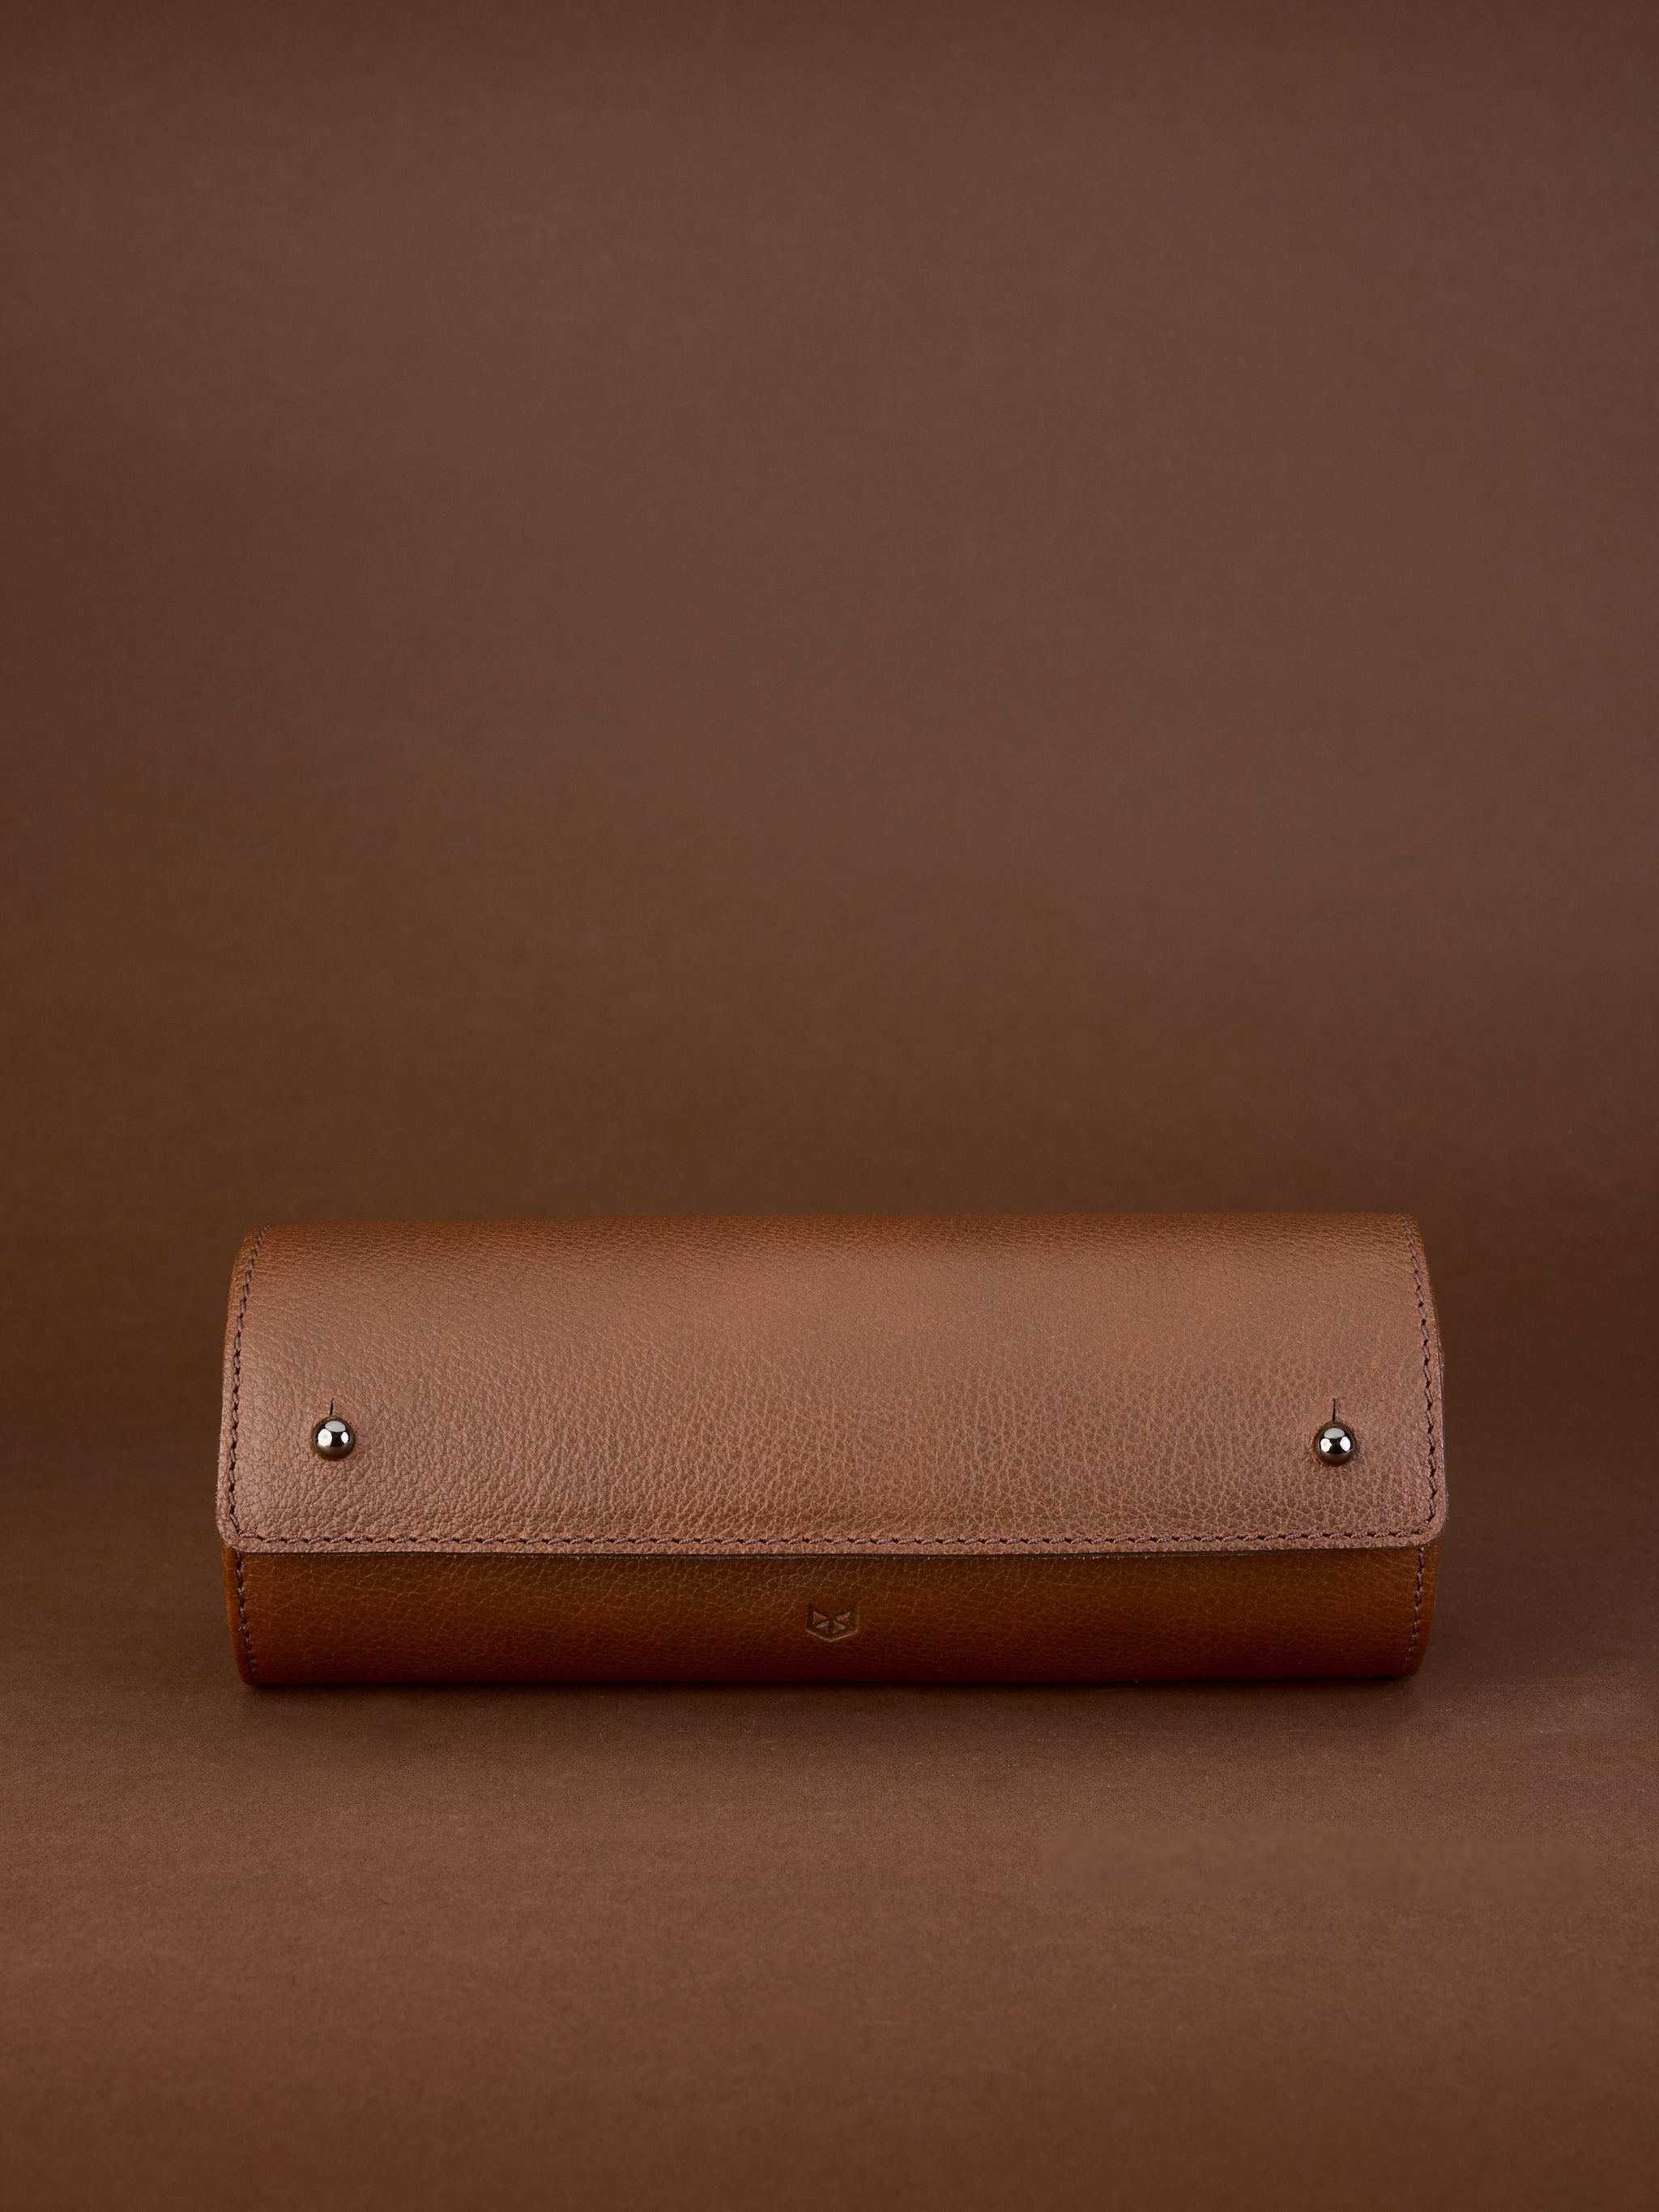 Single Watch Travel Case - Light Taupe - Granulated Leather